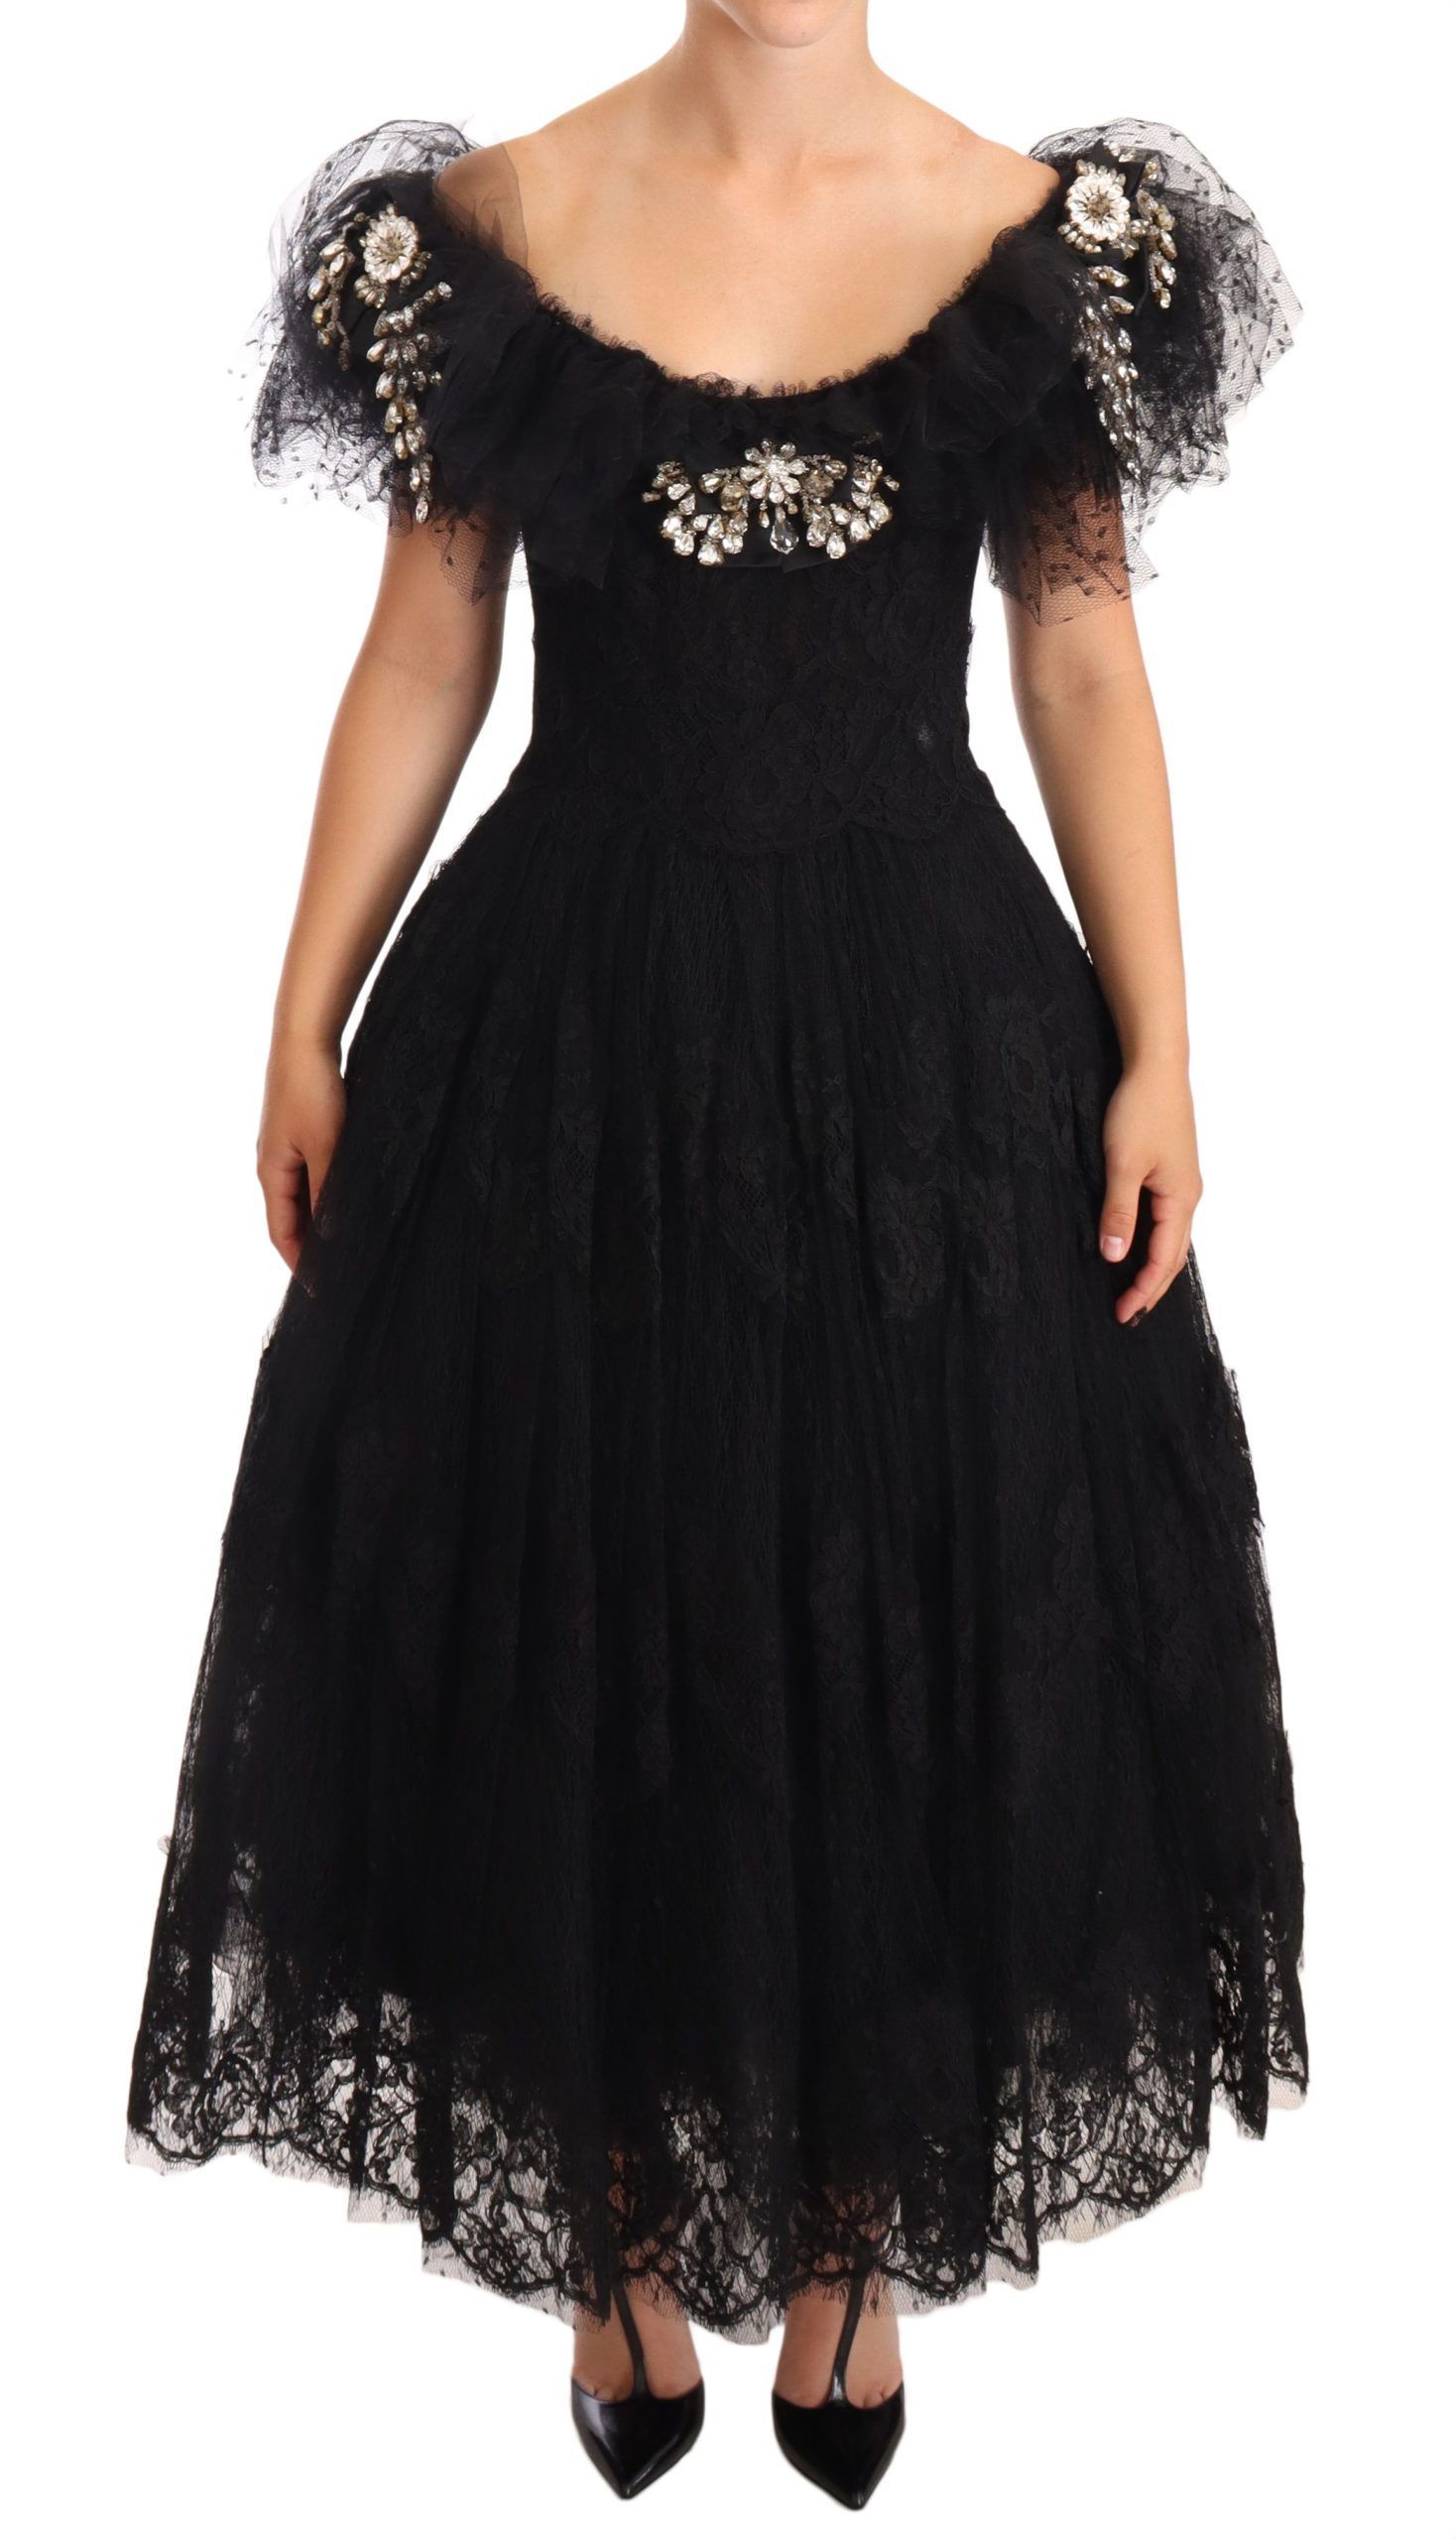 Black Dolce & Gabbana Black Floral Lace Crystal Ball Gown Dress